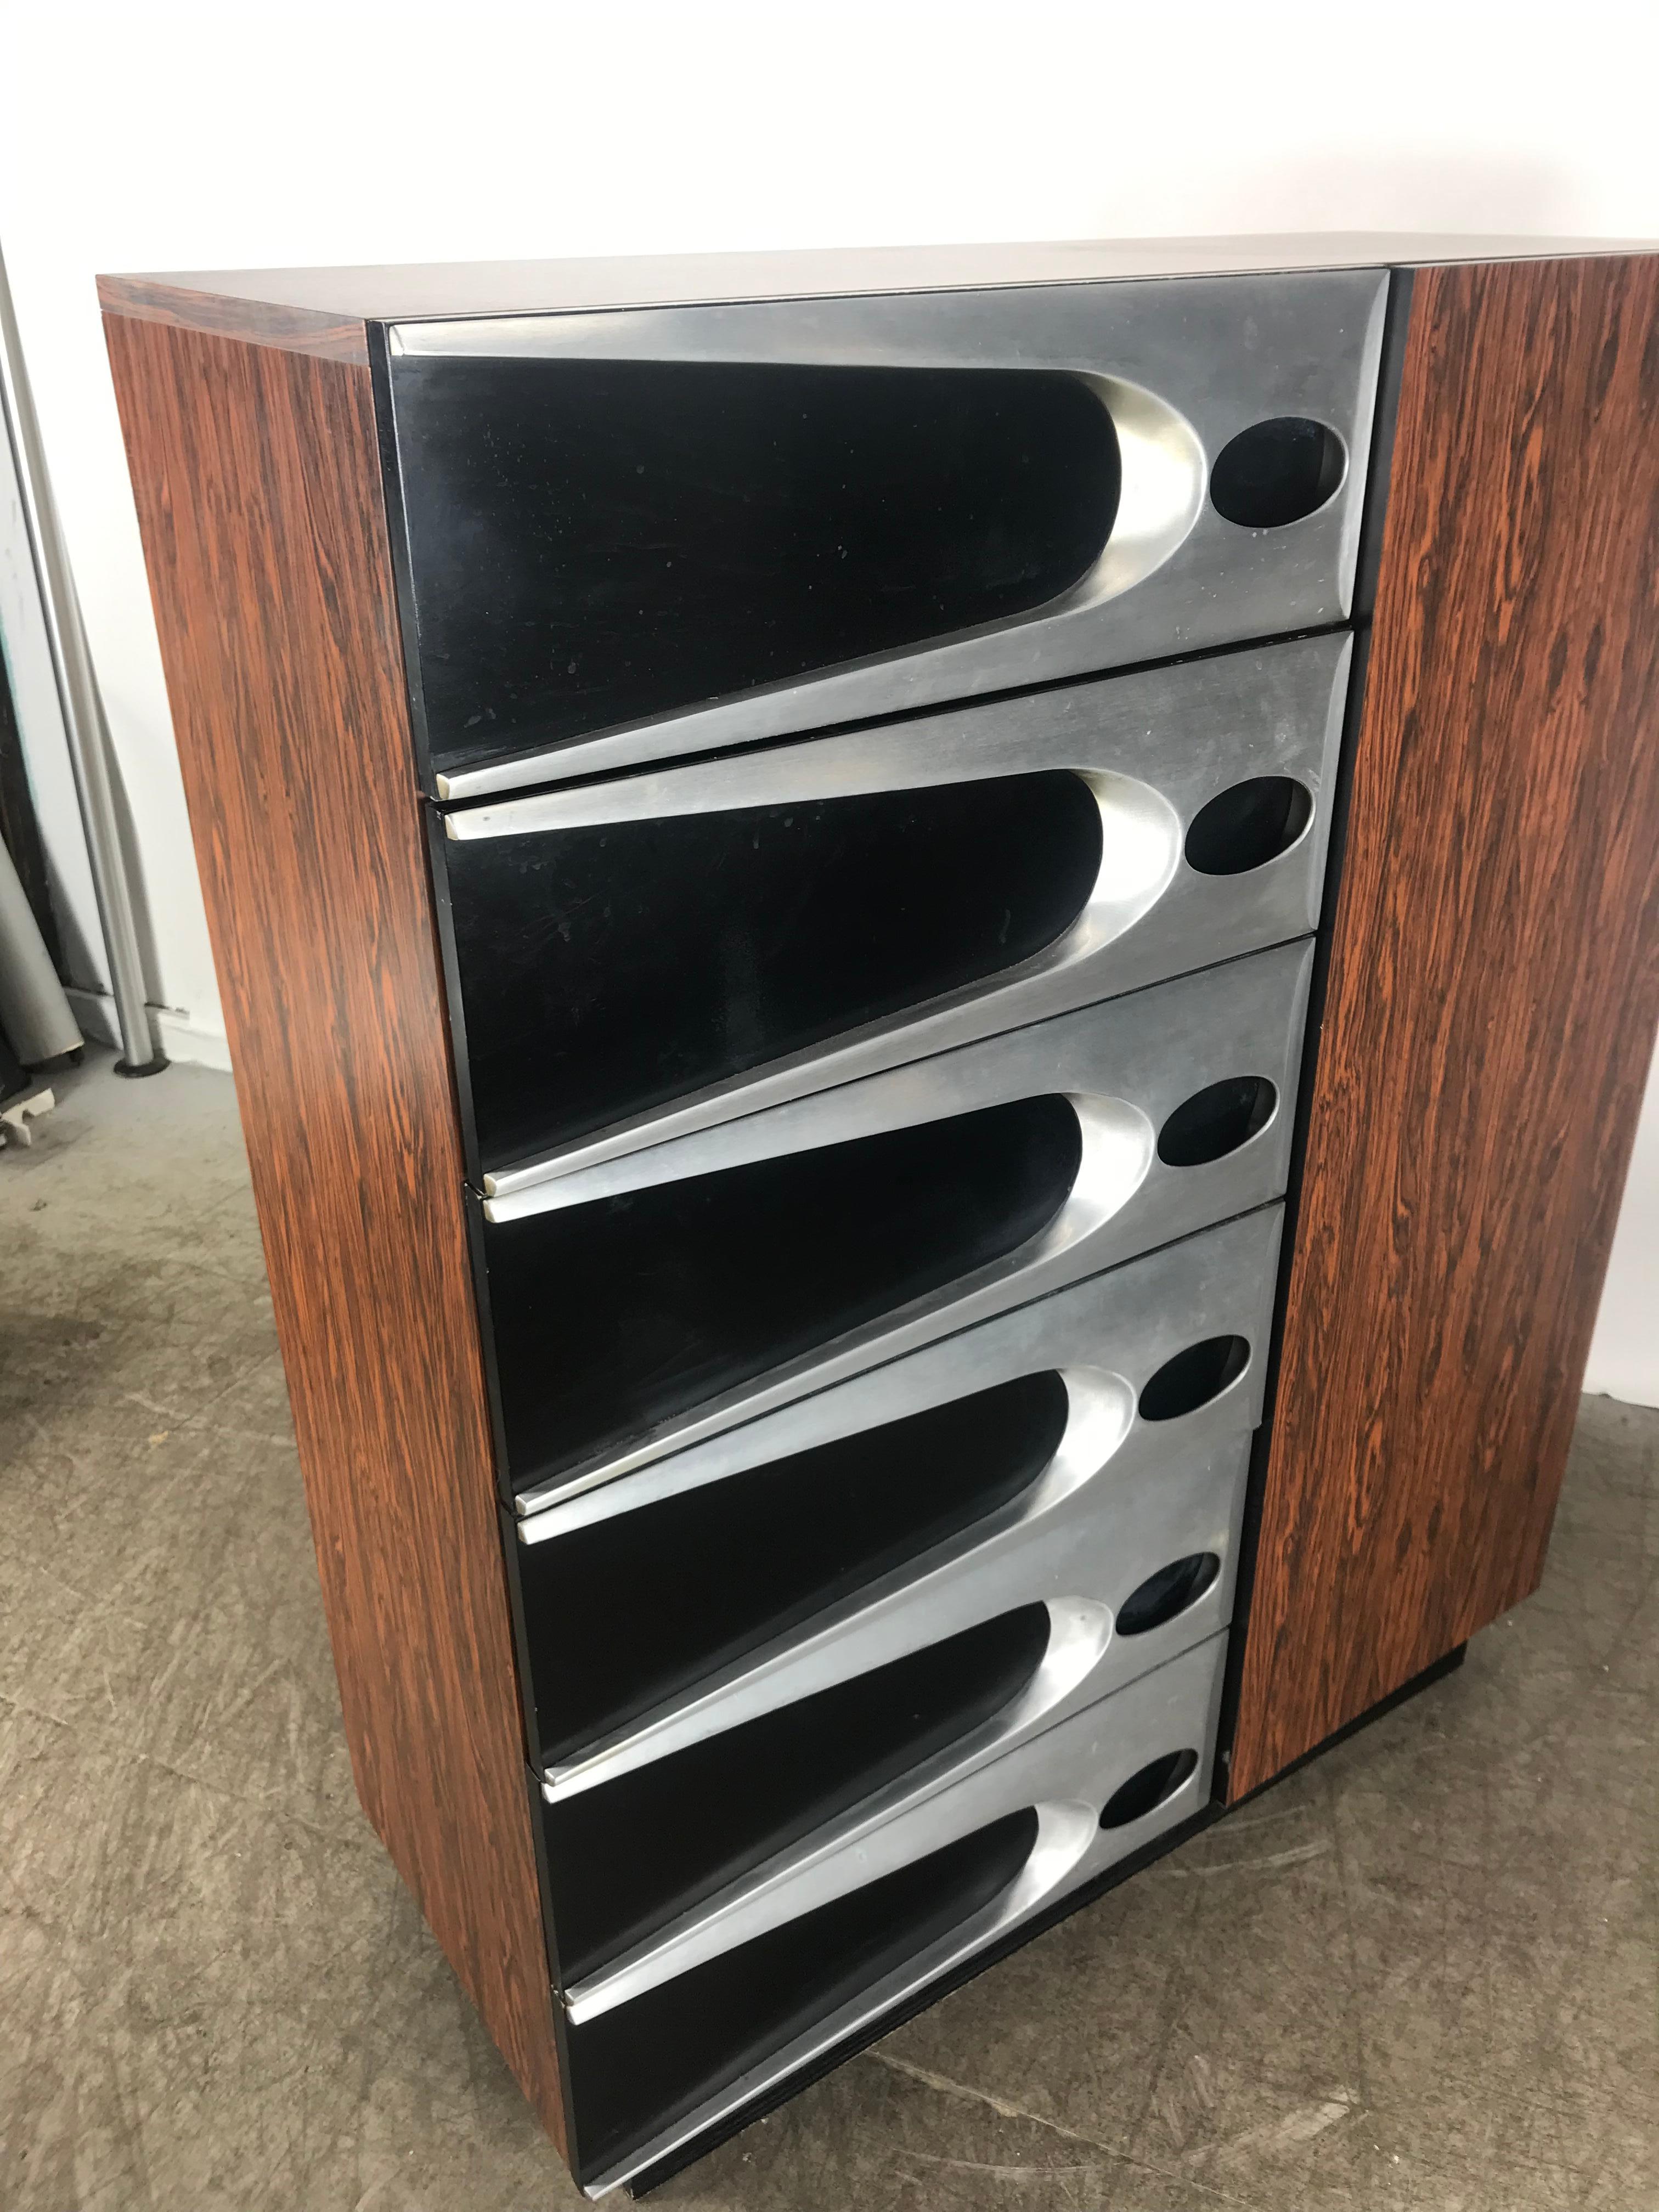 Modernist, Space Age 6-drawer dresser / armoire.. Elegance blended with Space Age design. Most unusual rosewood melamine .laminate and aluminum. Dated 1974 Six drawers on the left, large closet door with 4 shelves. Please see additional listings for